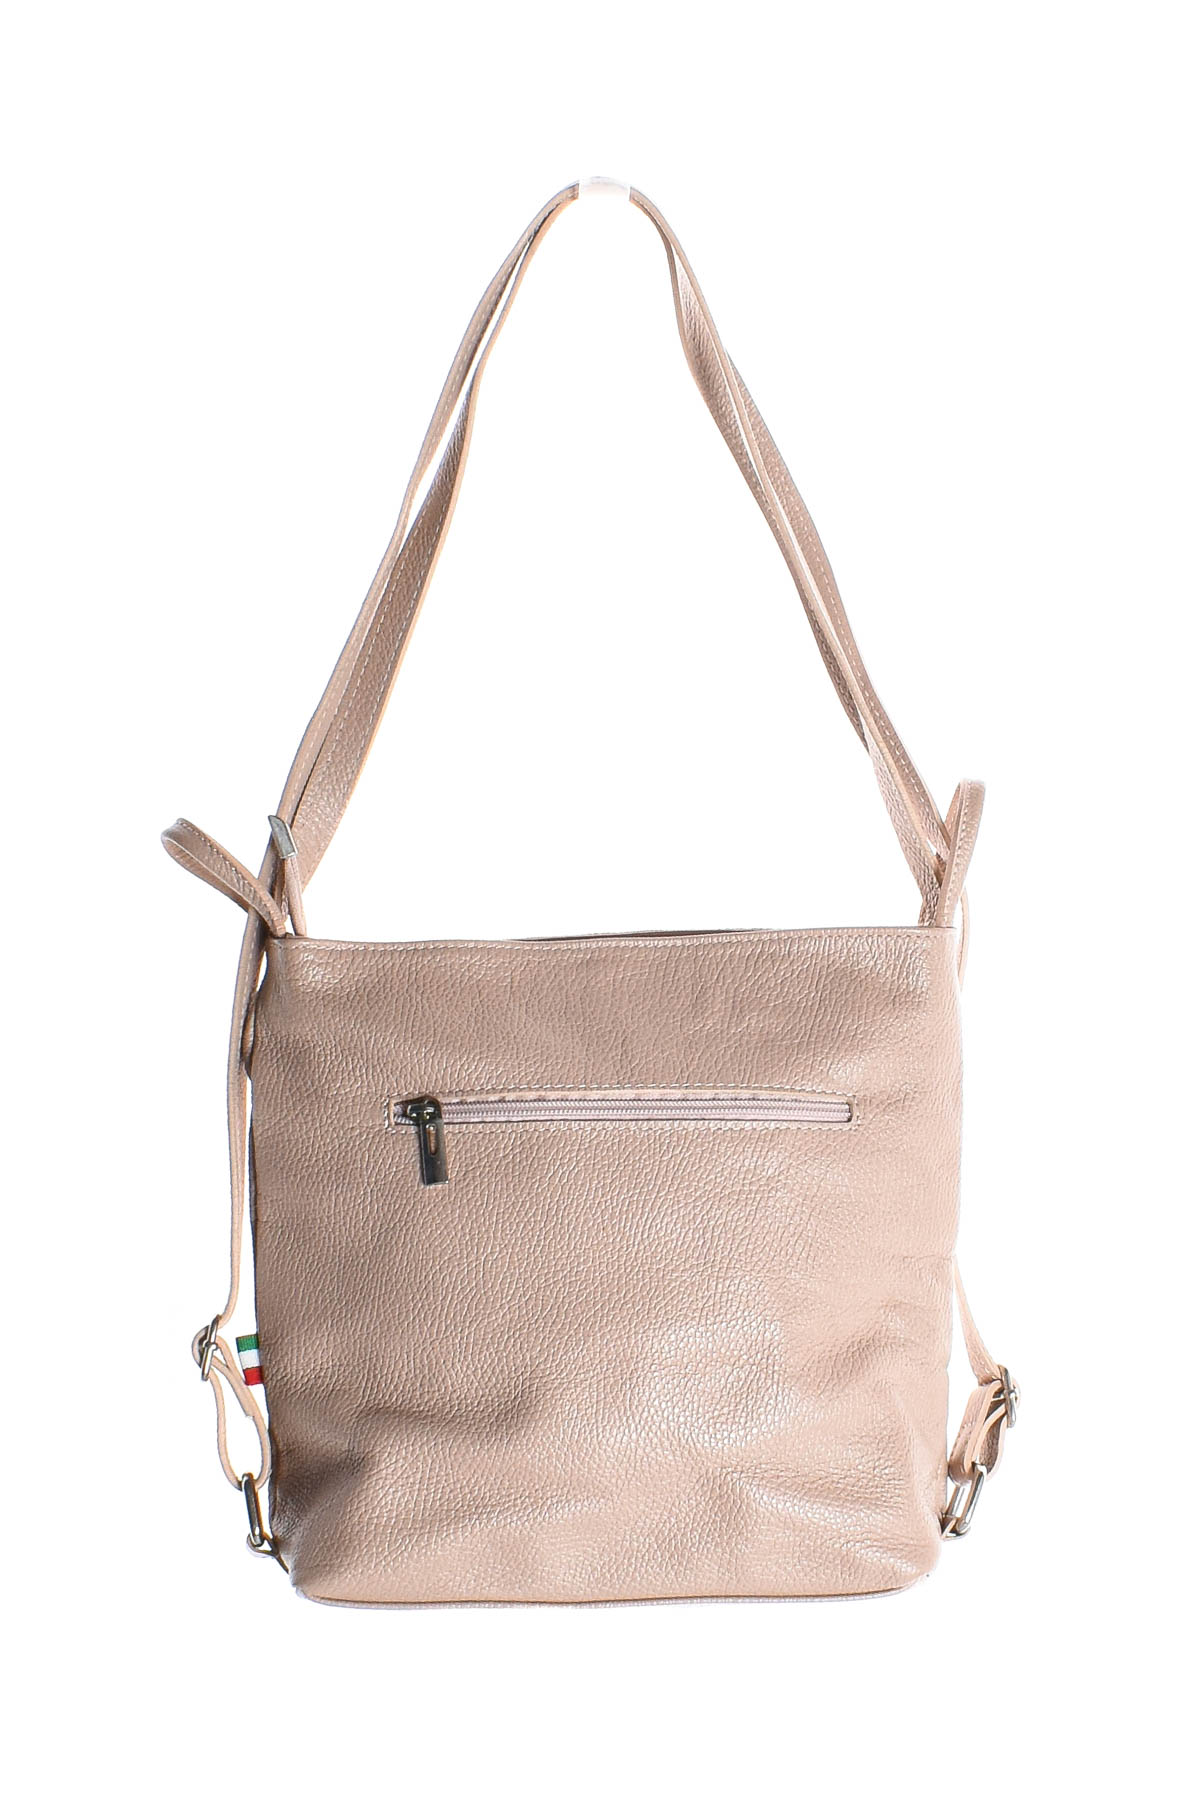 Women's bag - Made in Italy - 1